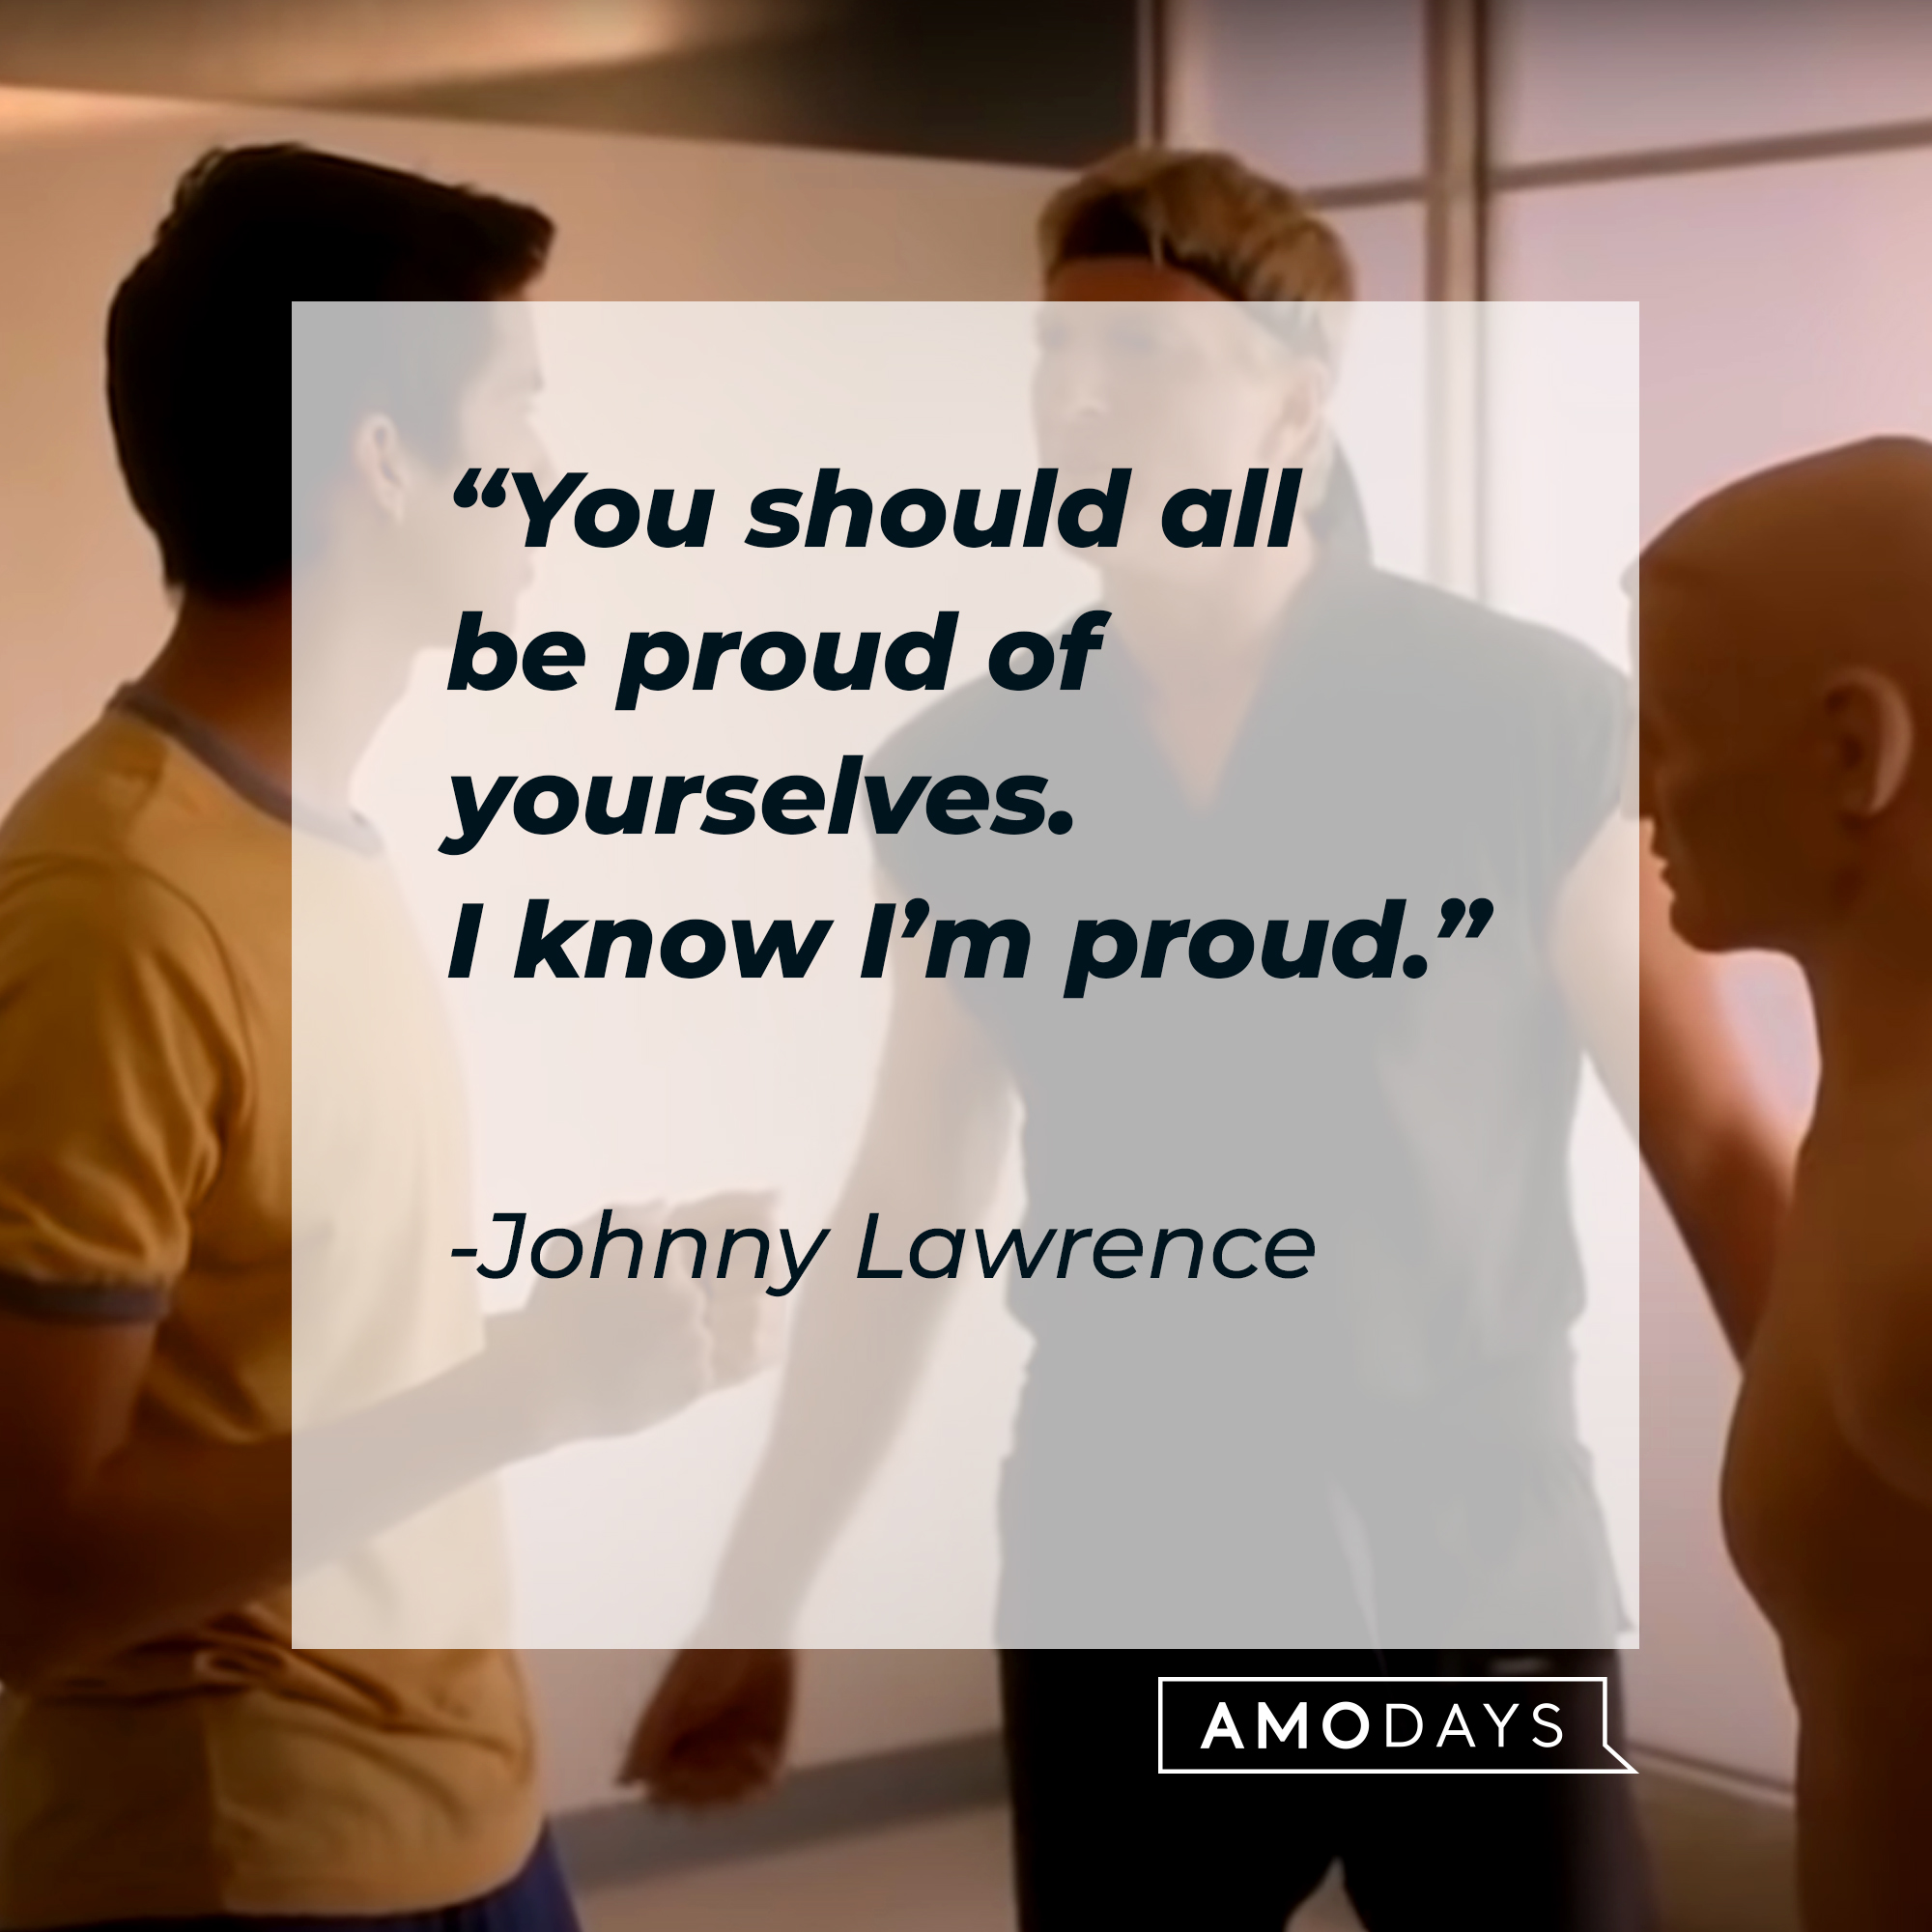 Johnny Lawrence, with his quote: “You should all be proud of yourselves. I know I’m proud.” | Source: facebook.com/CobraKaiSeries